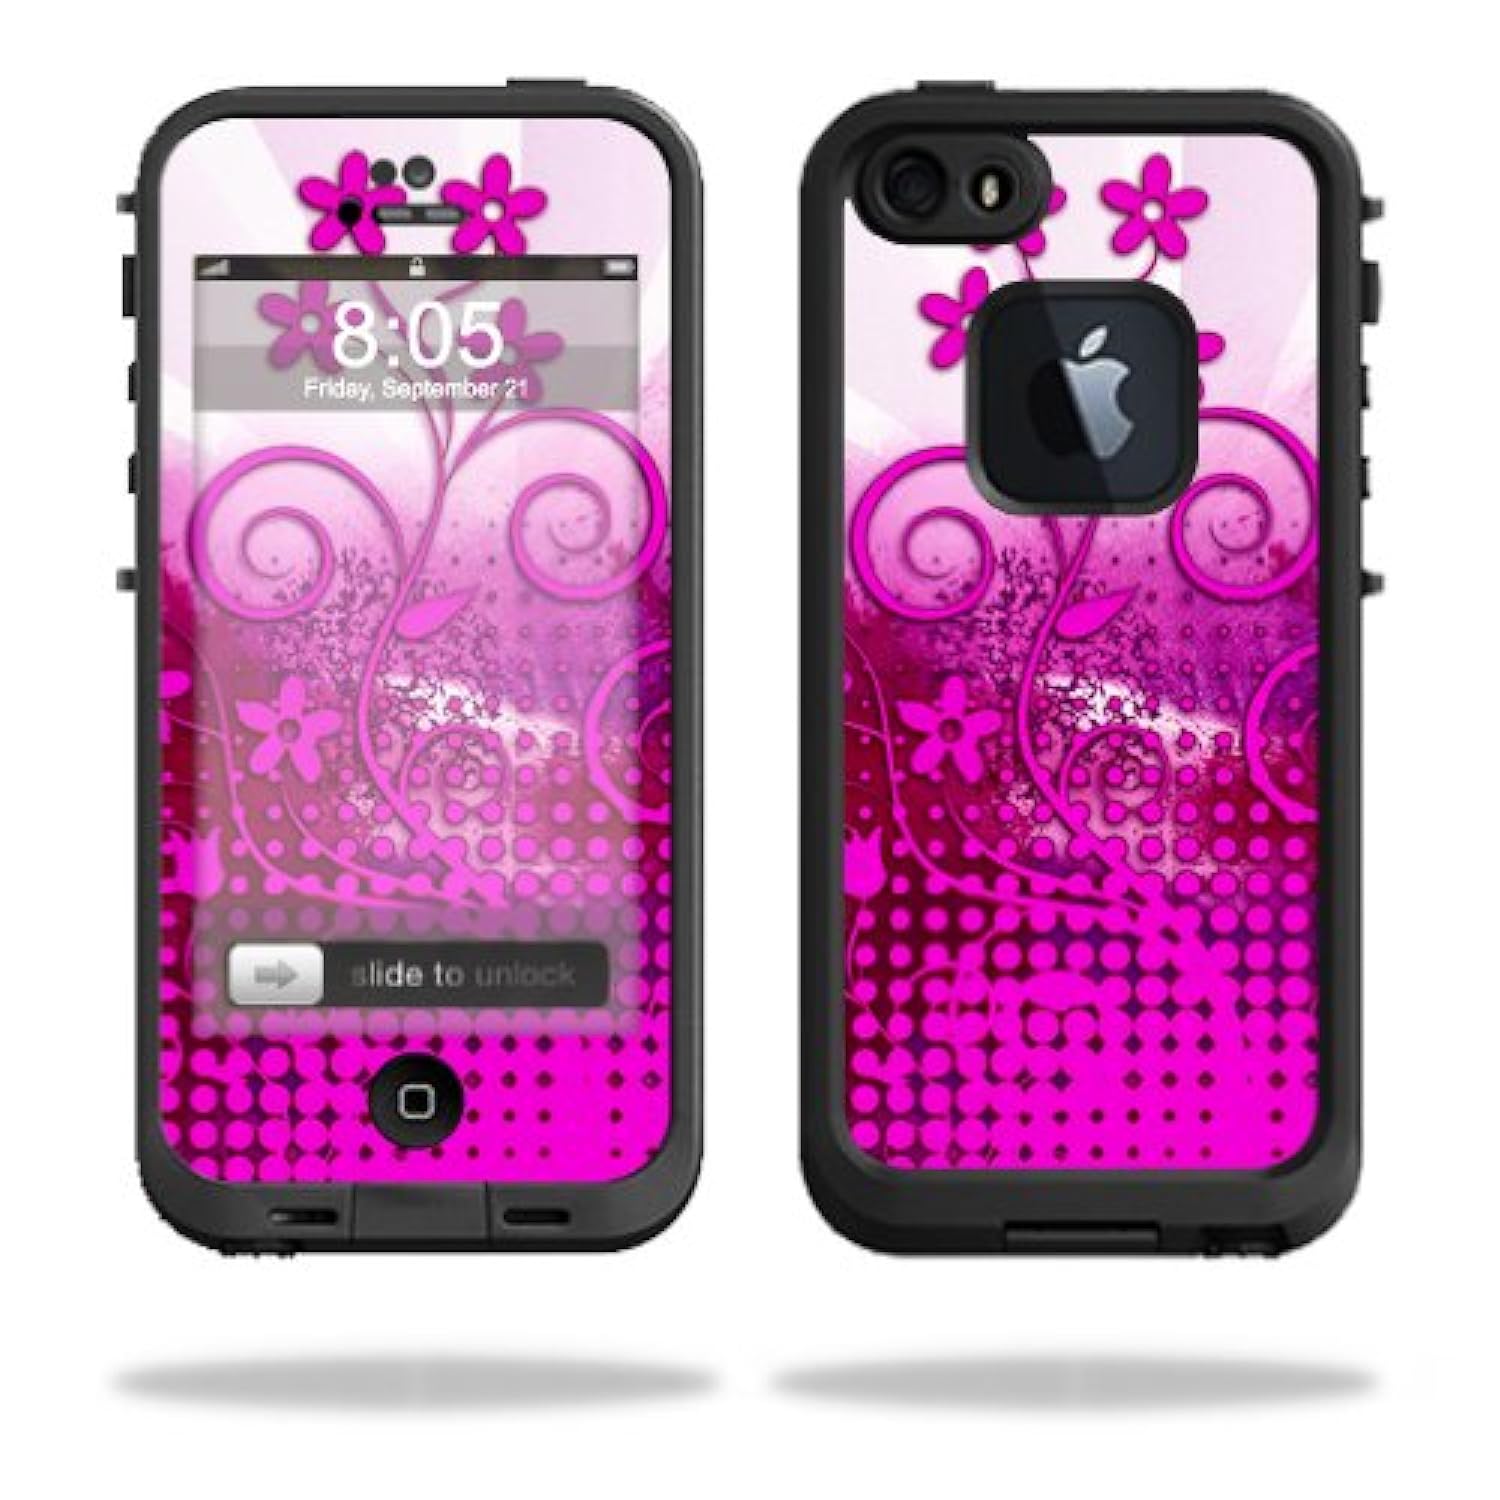 39ers 00 B00gs 1 Mightyskins Skin Compatible With Lifeproof Iphone 5 5s Se Case Fre Case Wrap Sticker Skins Pink Growth